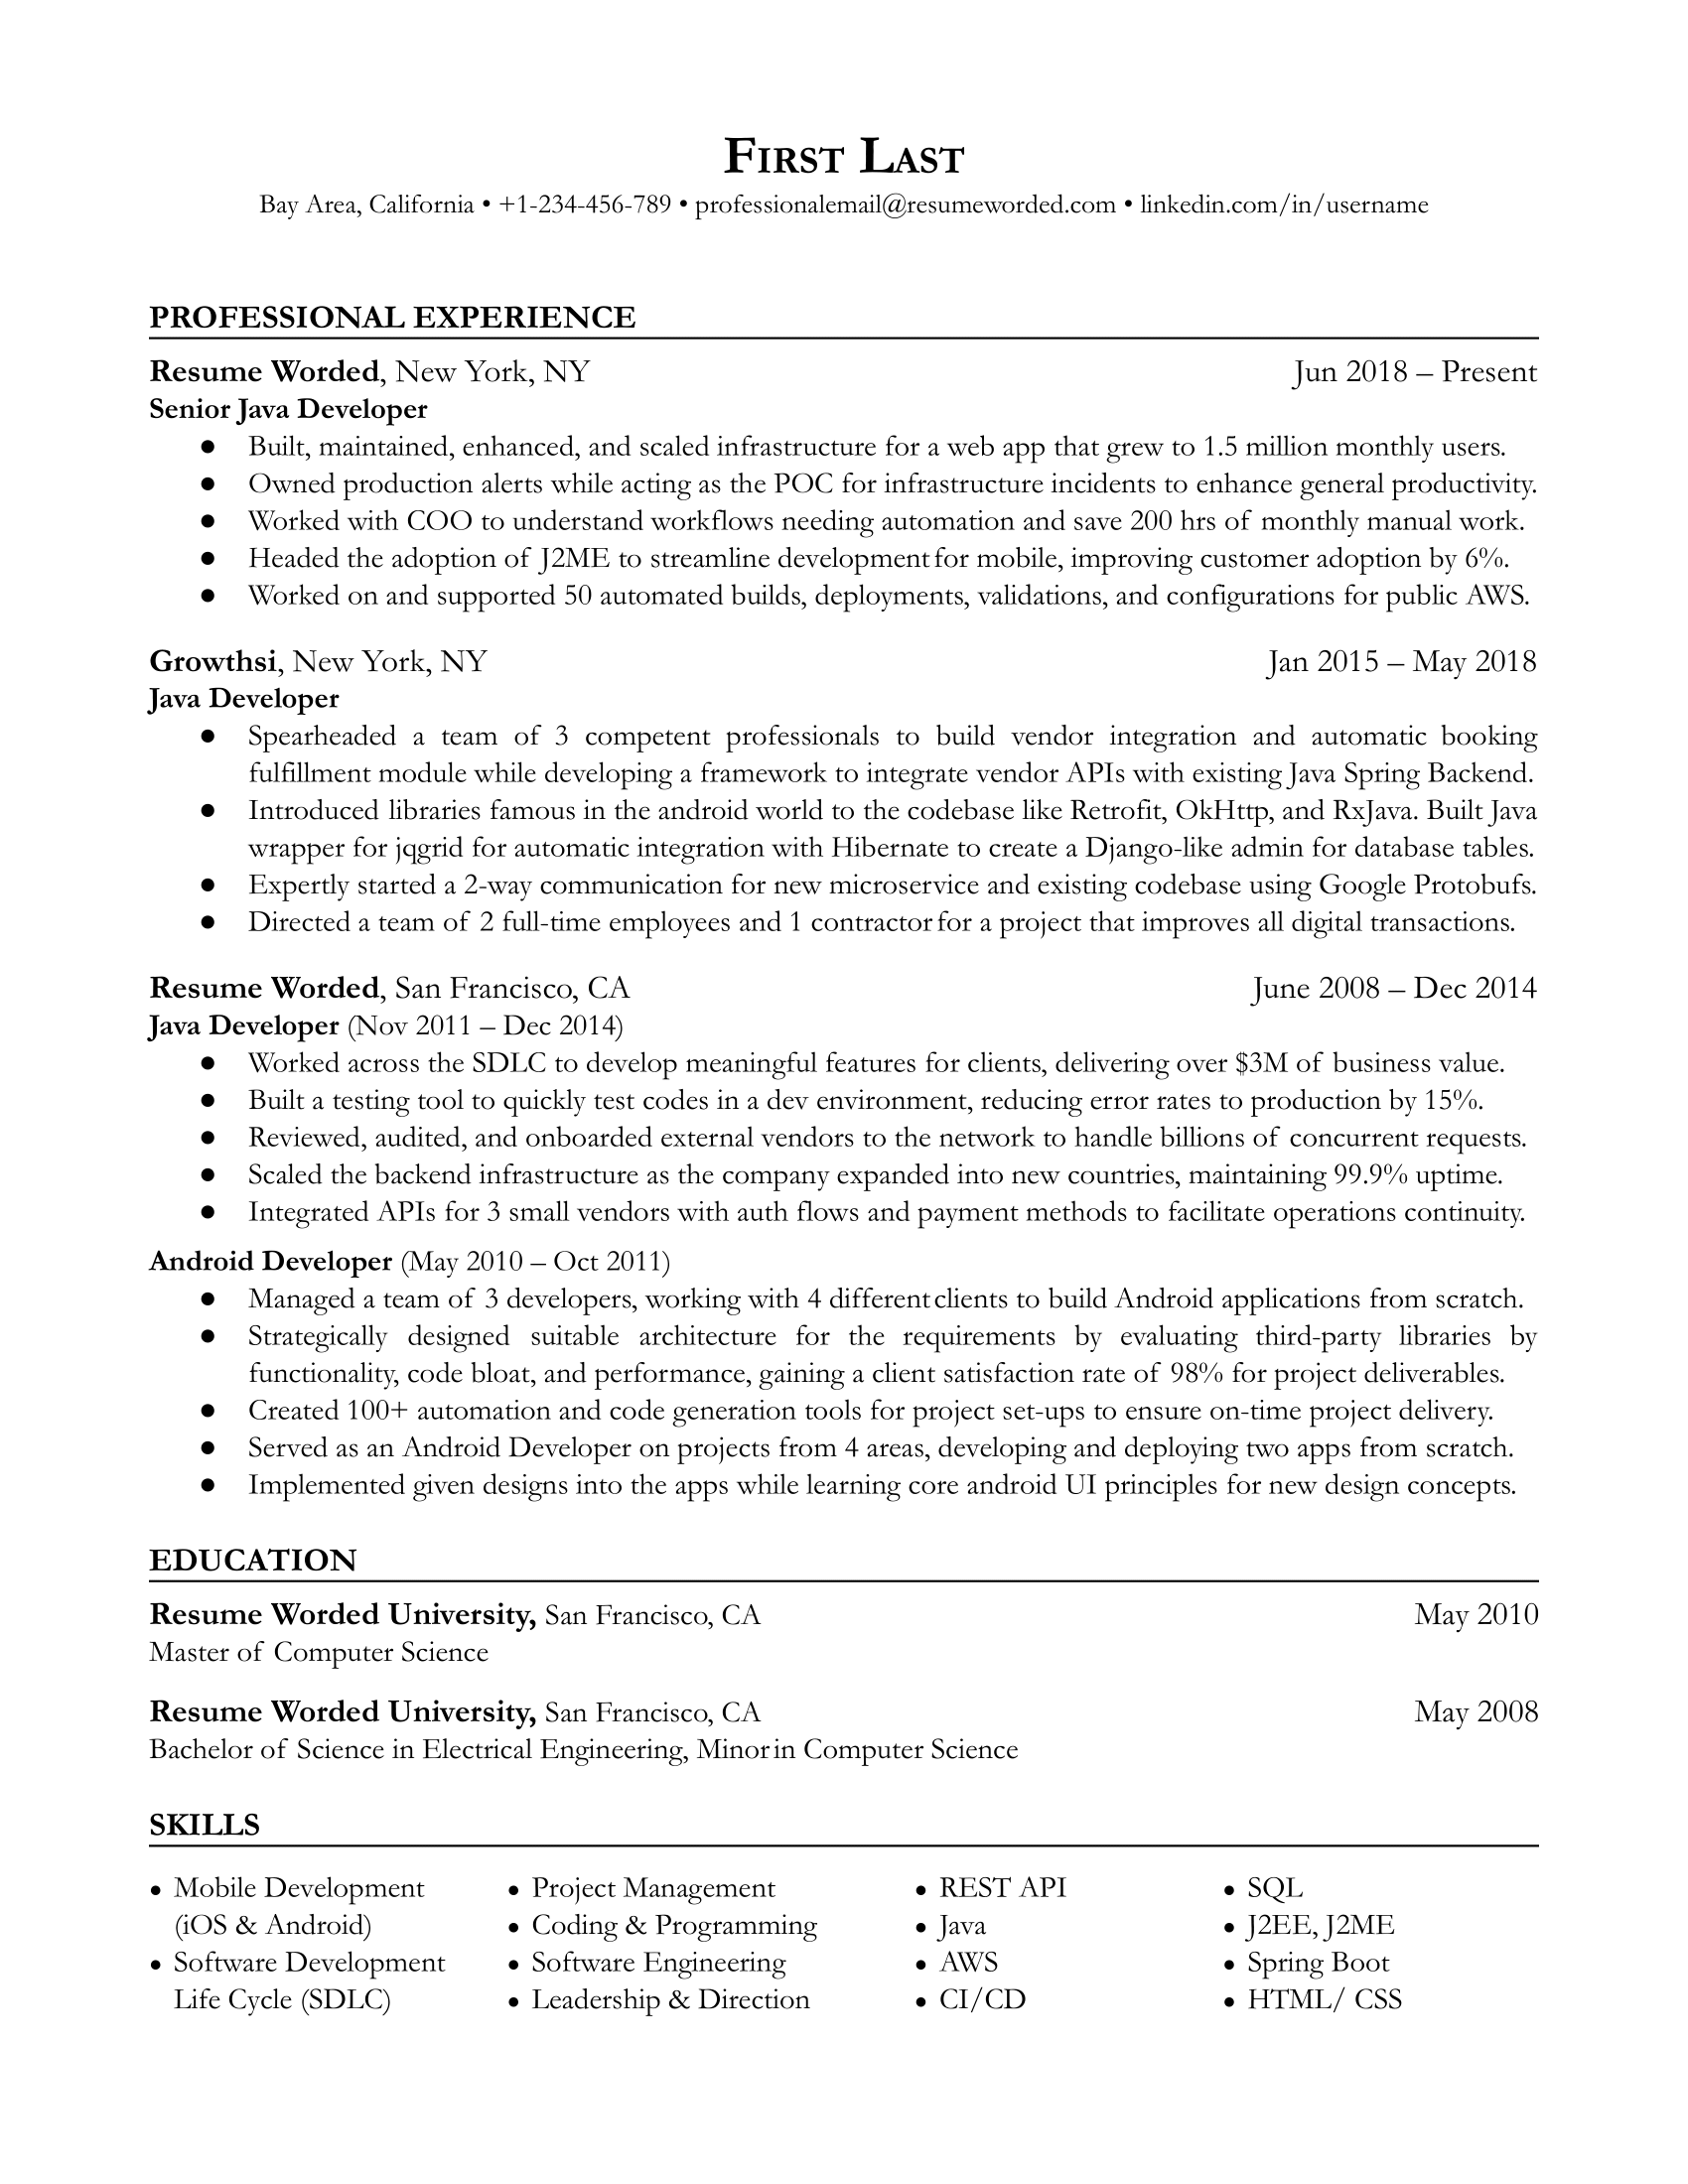 A resume for a senior java developer with a master's degree and experience as an android developer and Java developer.